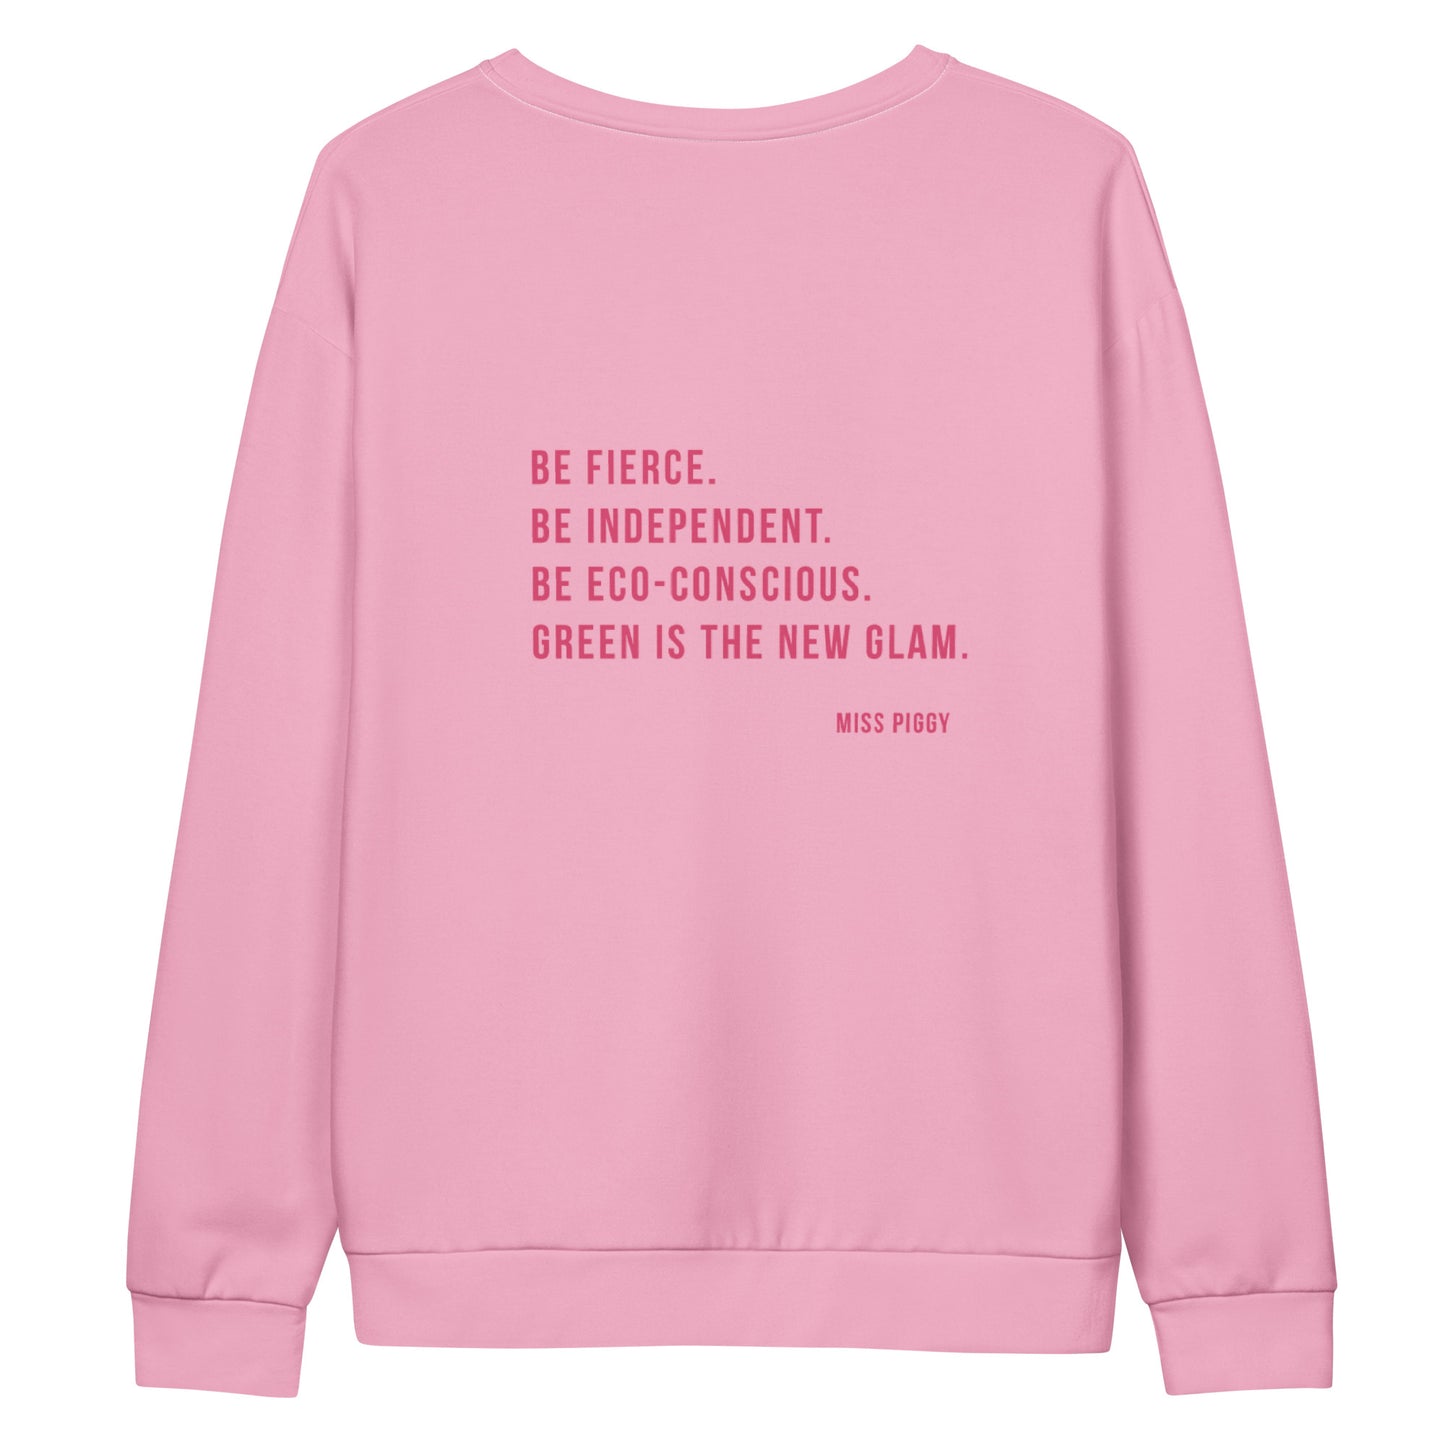 GREEN GLAM SWEATER cotton candy pink